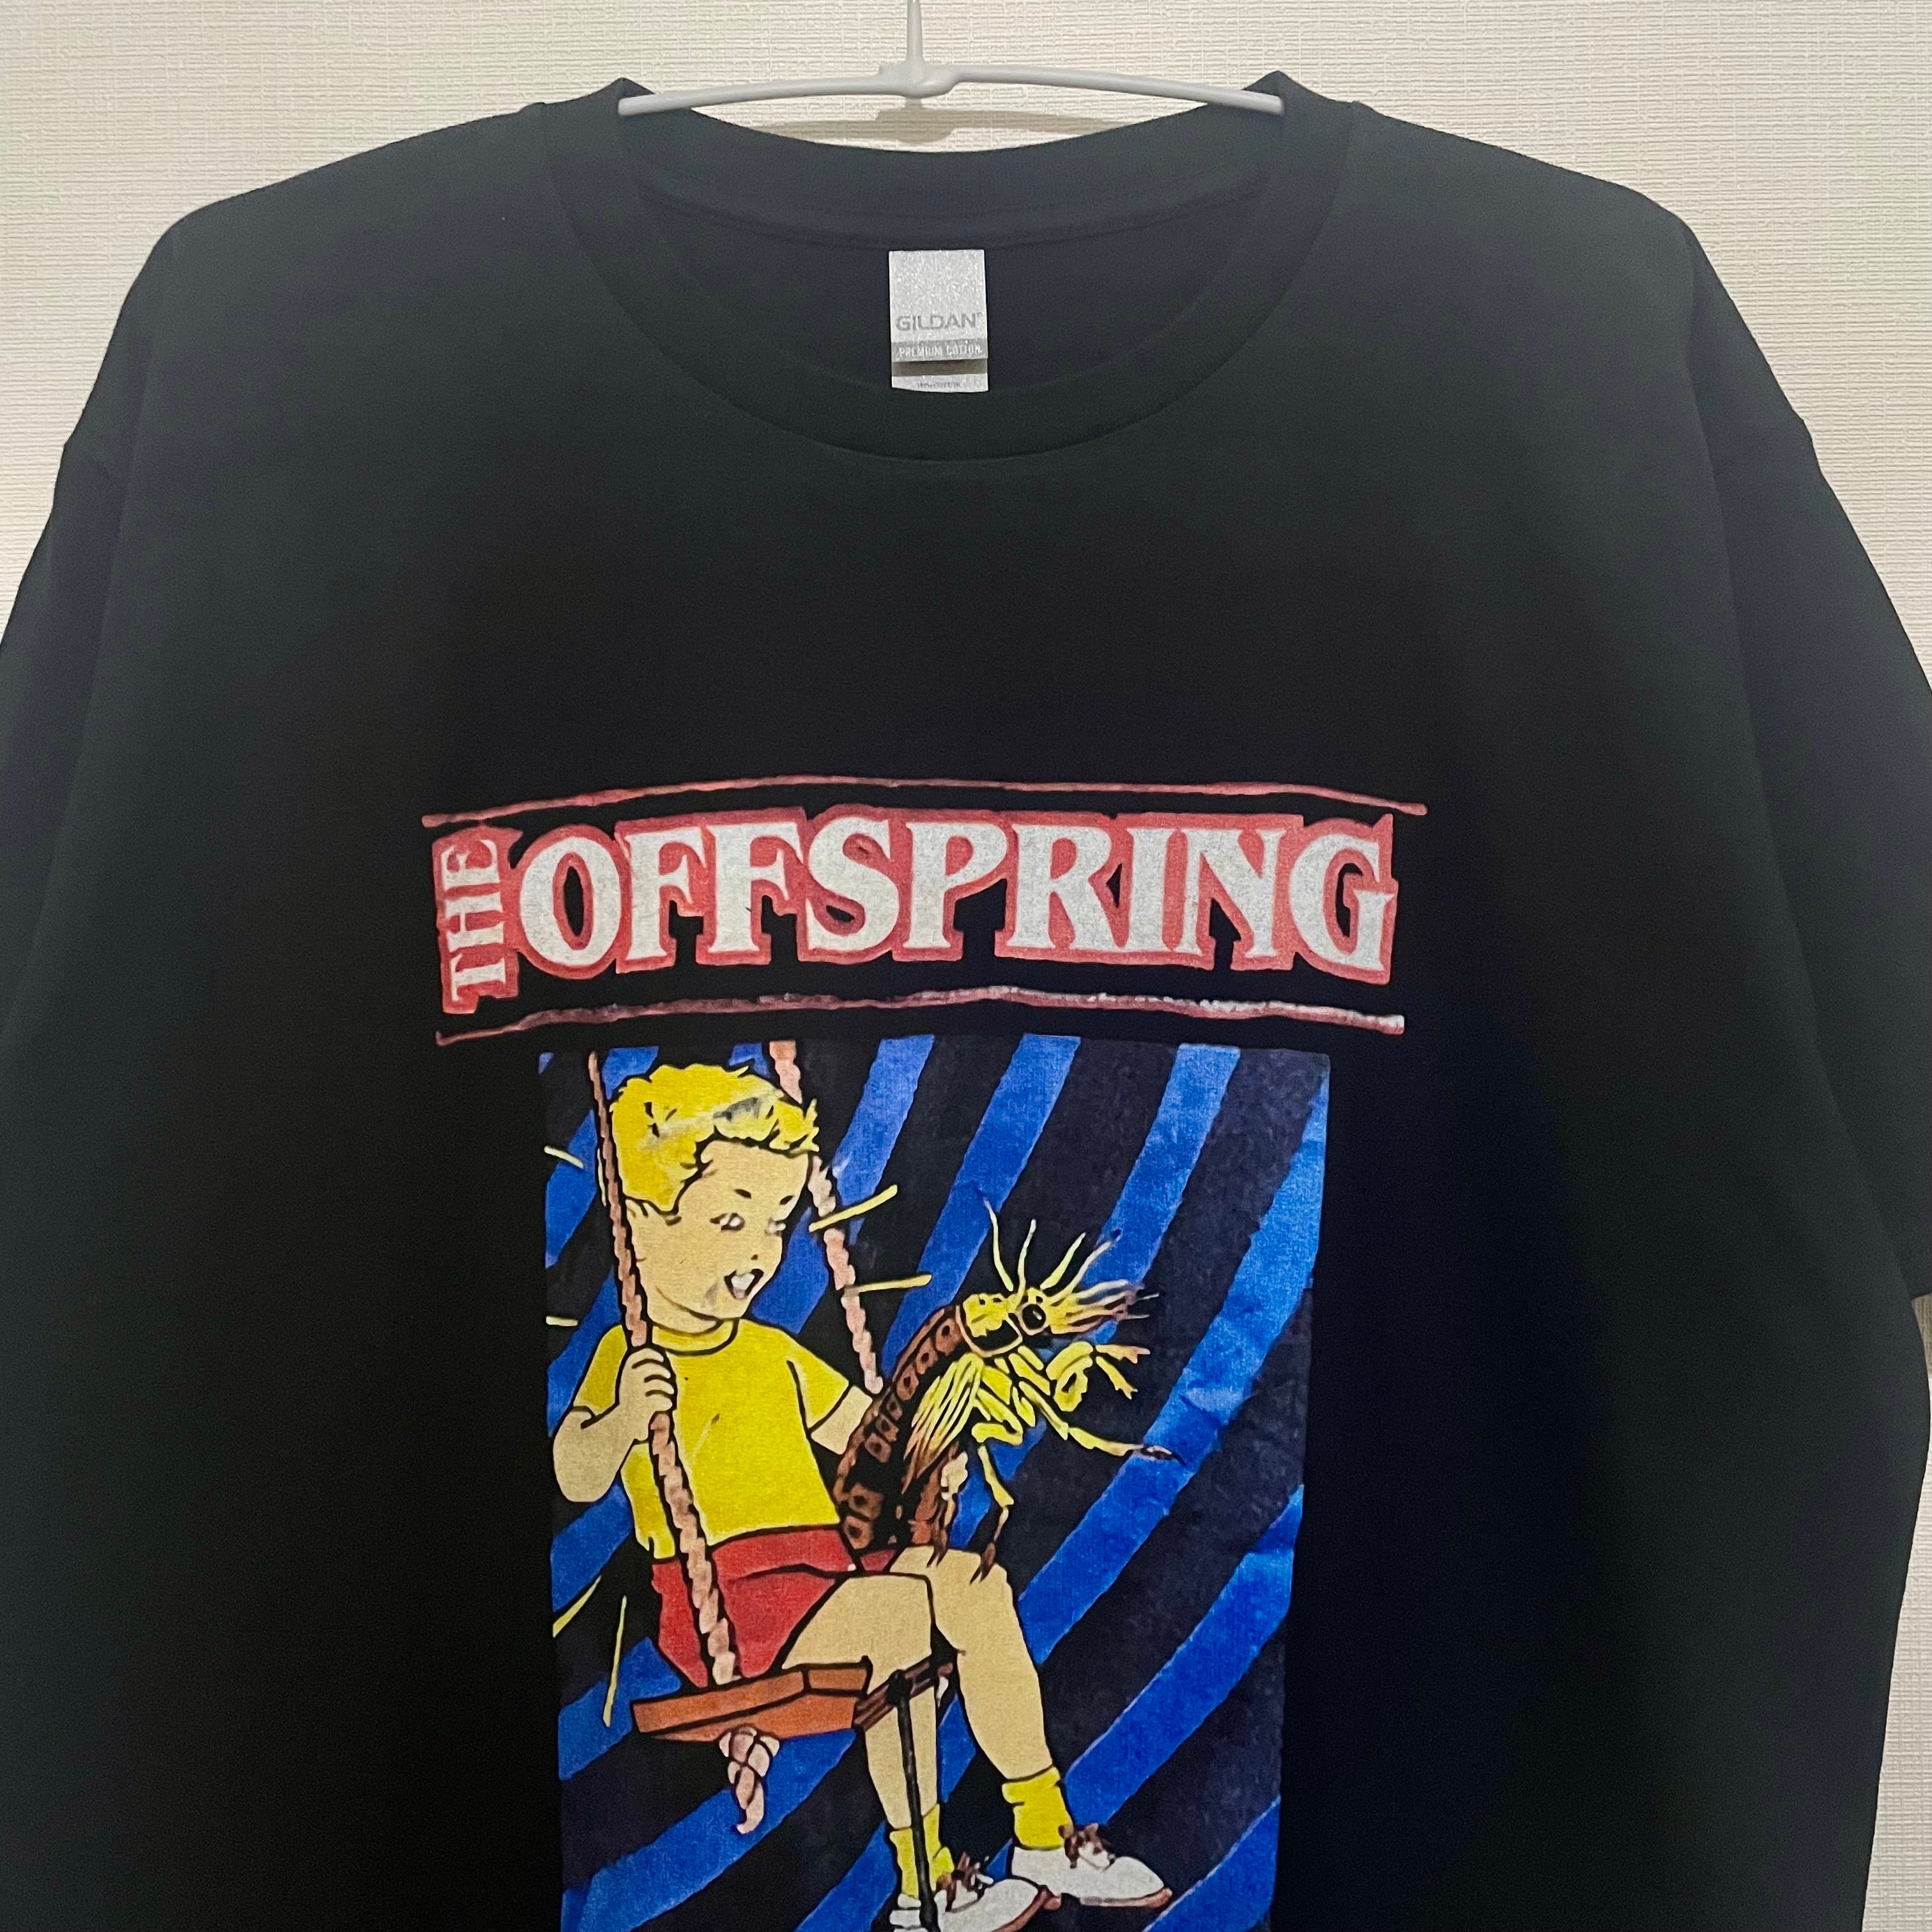 THE OFFSPRING Tシャツ TOUR 1999 オフスプリング Tee | BF MERCH'S